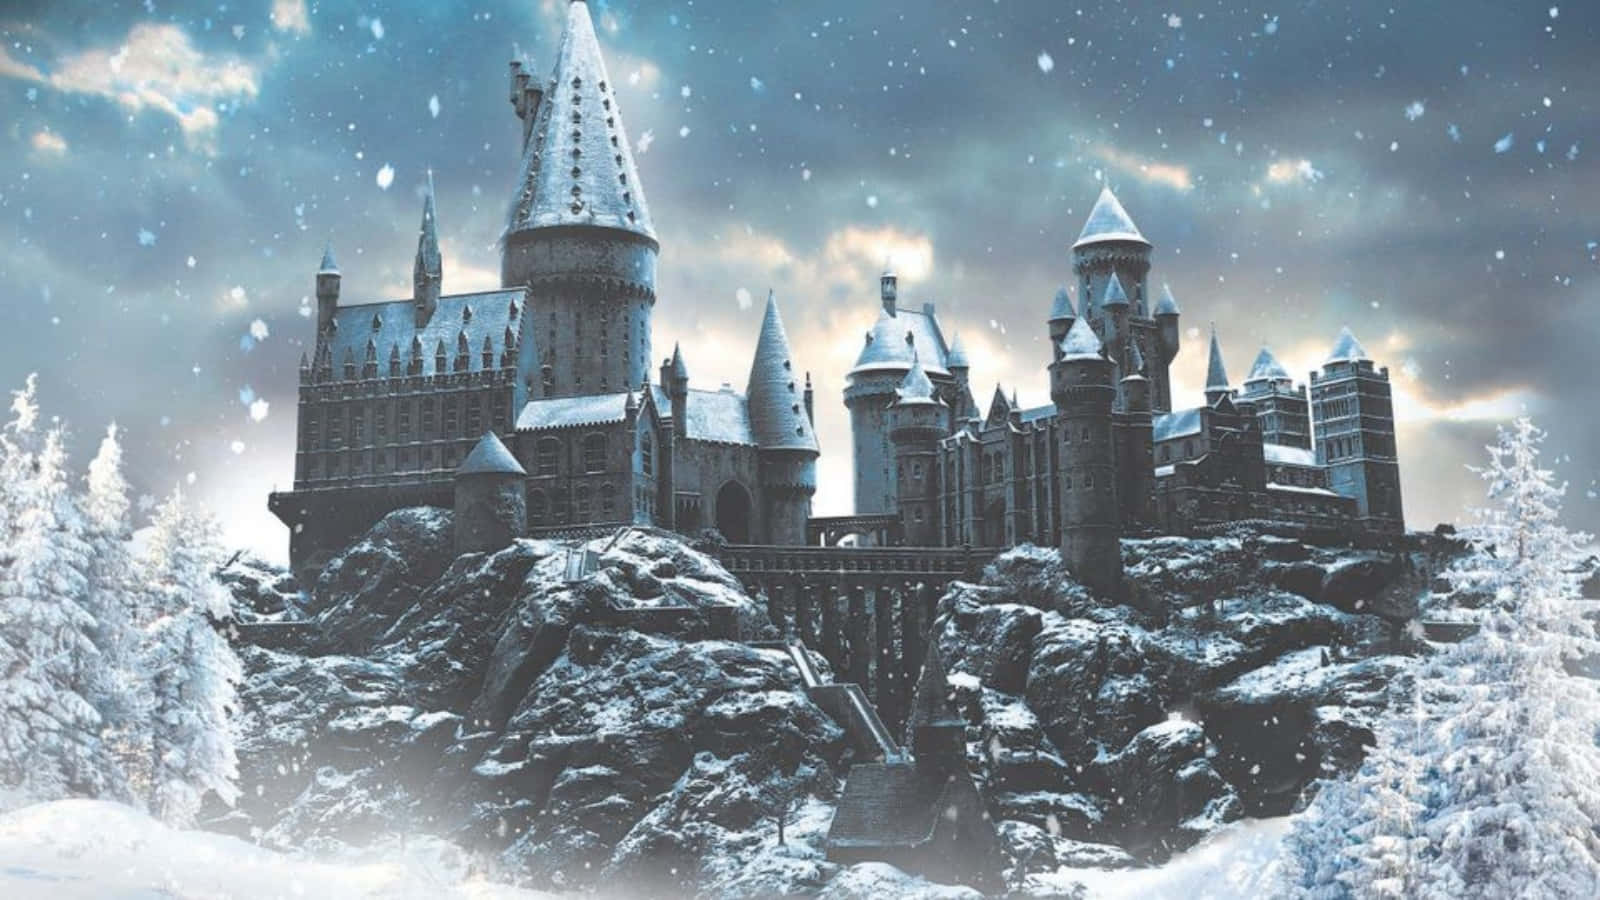 Welcome to the Magical World of Hogwarts